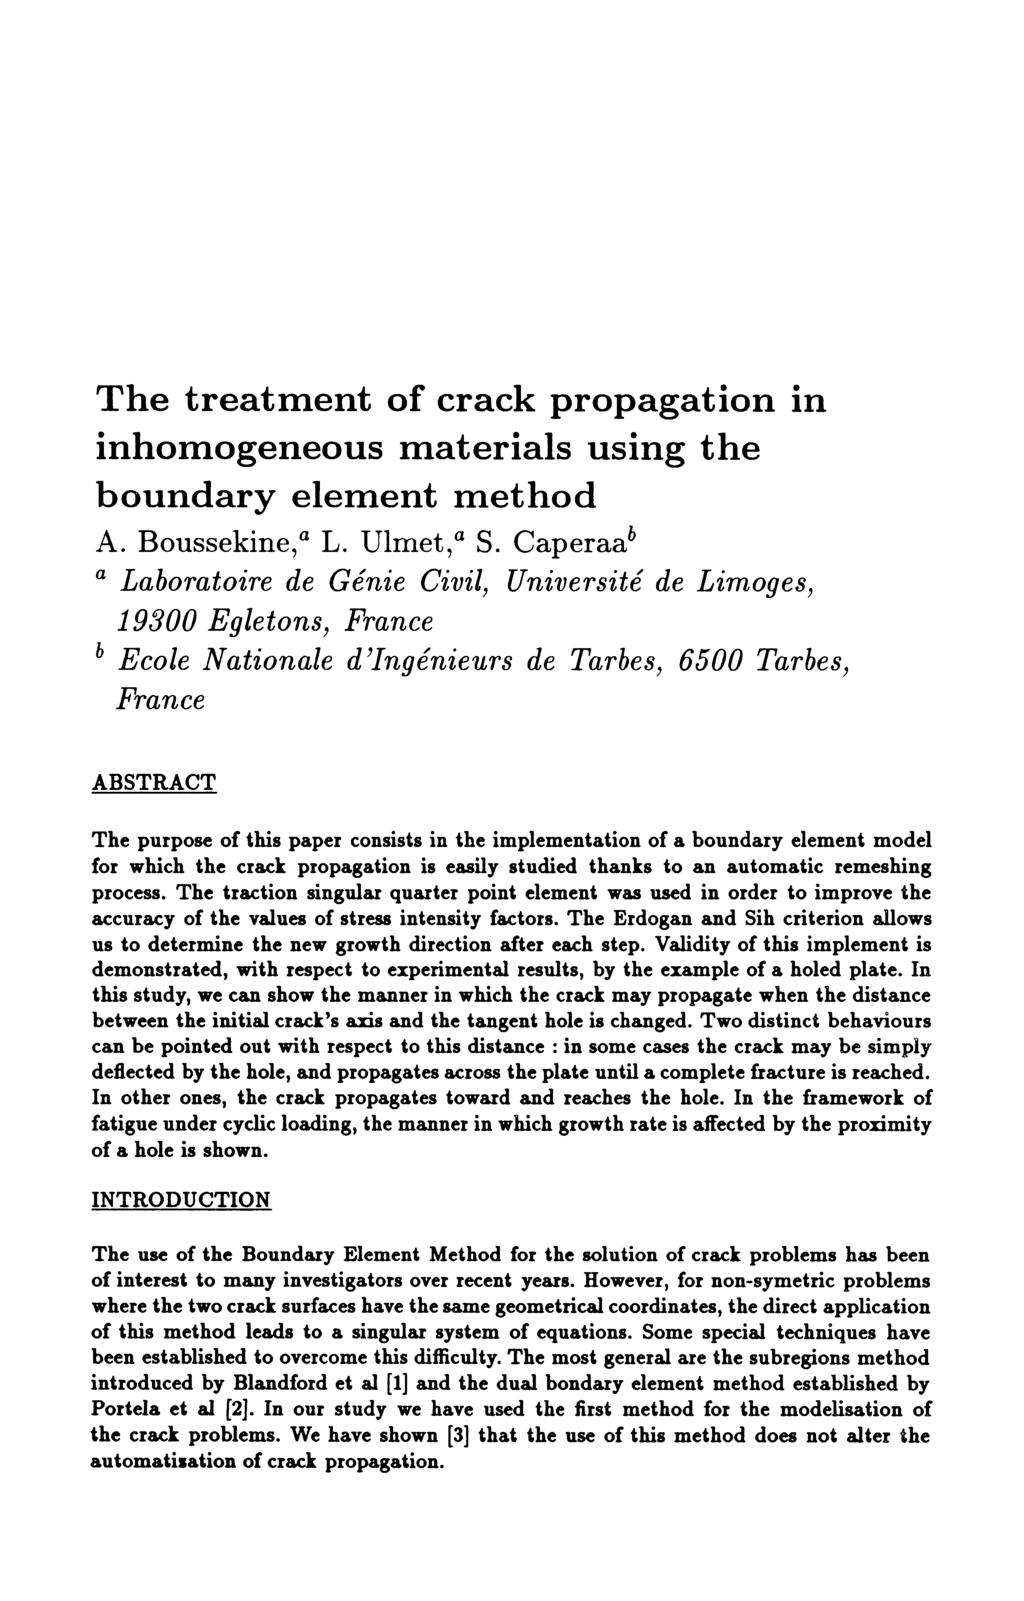 The treatment of crack propagation in inhomogeneous materials using the boundary element method A. Boussekine," L. Ulmet," S.